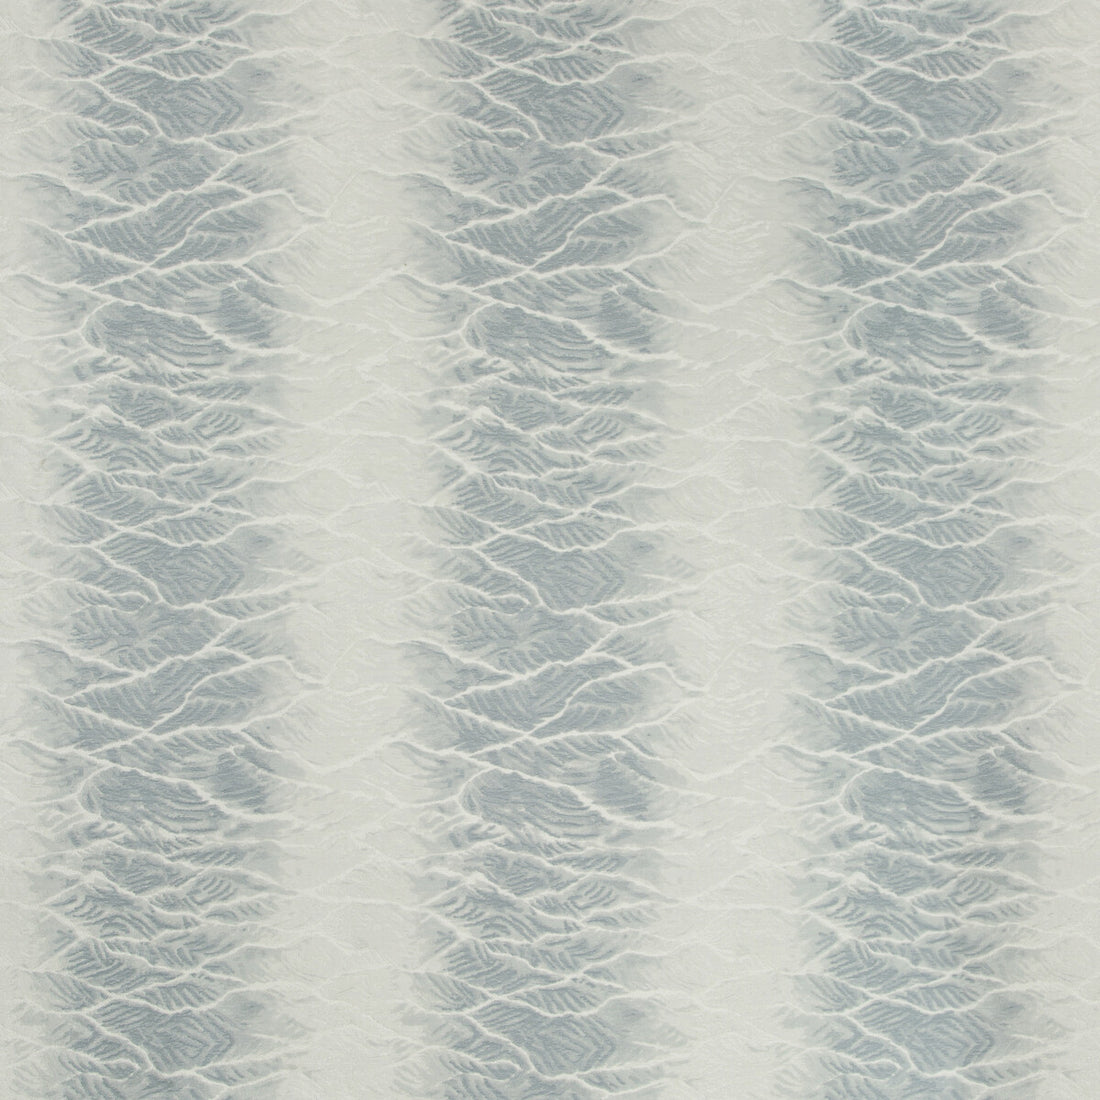 Onsen fabric in chambray color - pattern 35415.15.0 - by Kravet Couture in the Izu Collection collection